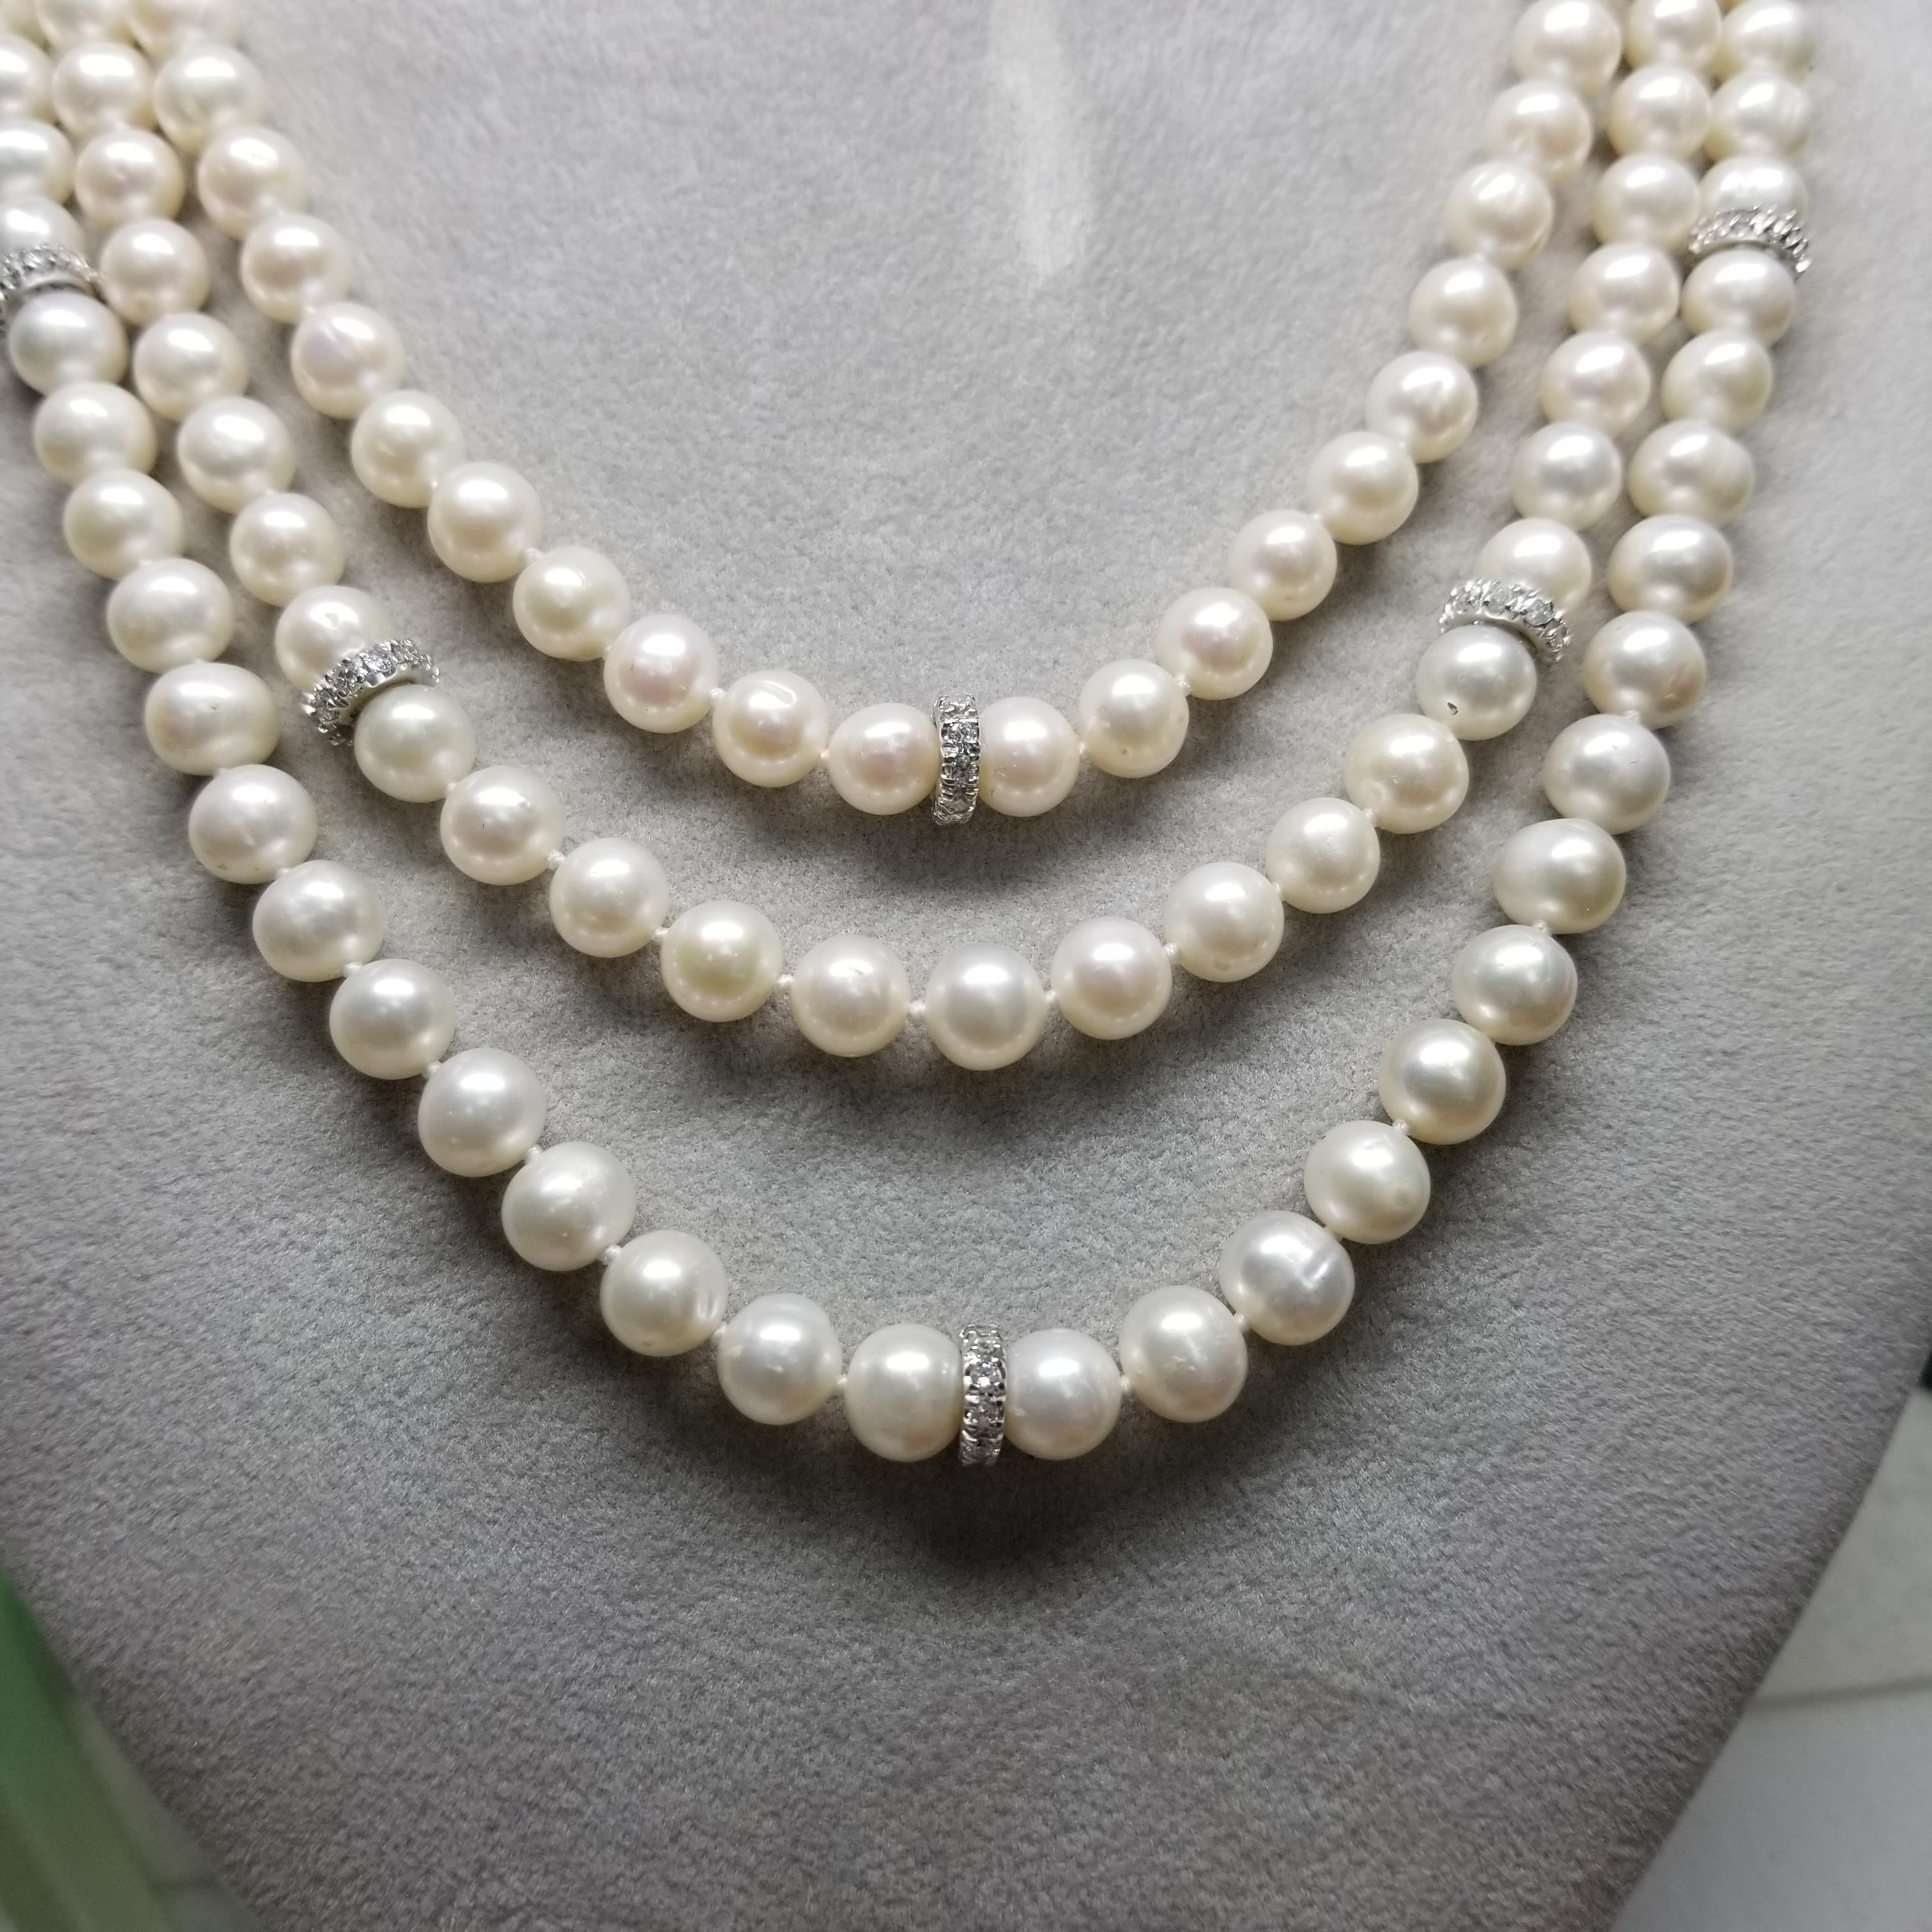 Round Cut 3 Strands of Fresh Water Cultured Pearls with 14k Diamond 2.16cts. Rondles For Sale